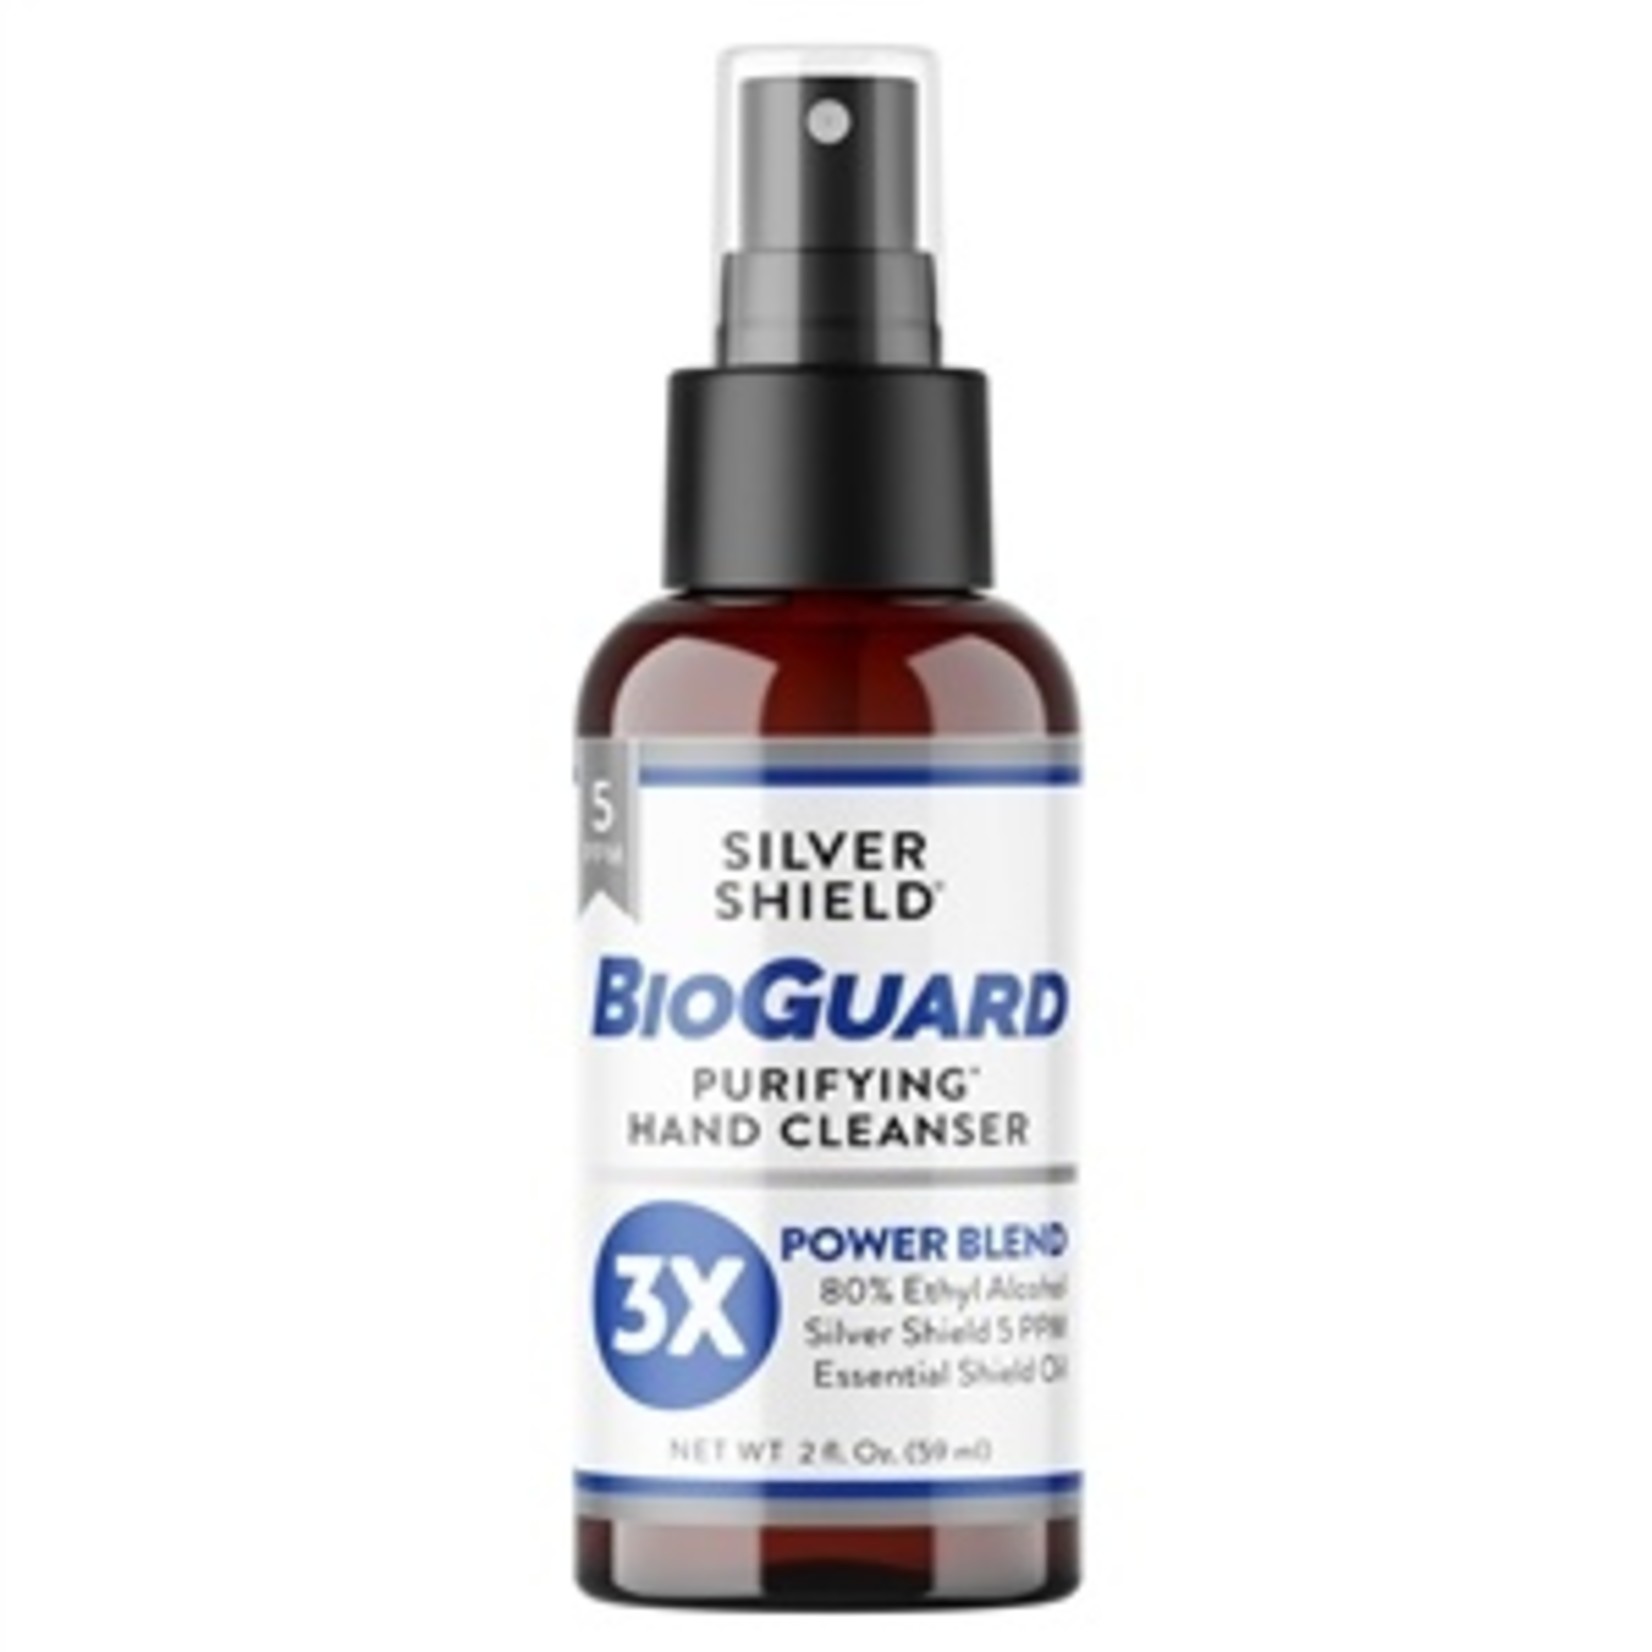 Nature's Sunshine Silver Shield Bioguard Purifying Hand Cleanser